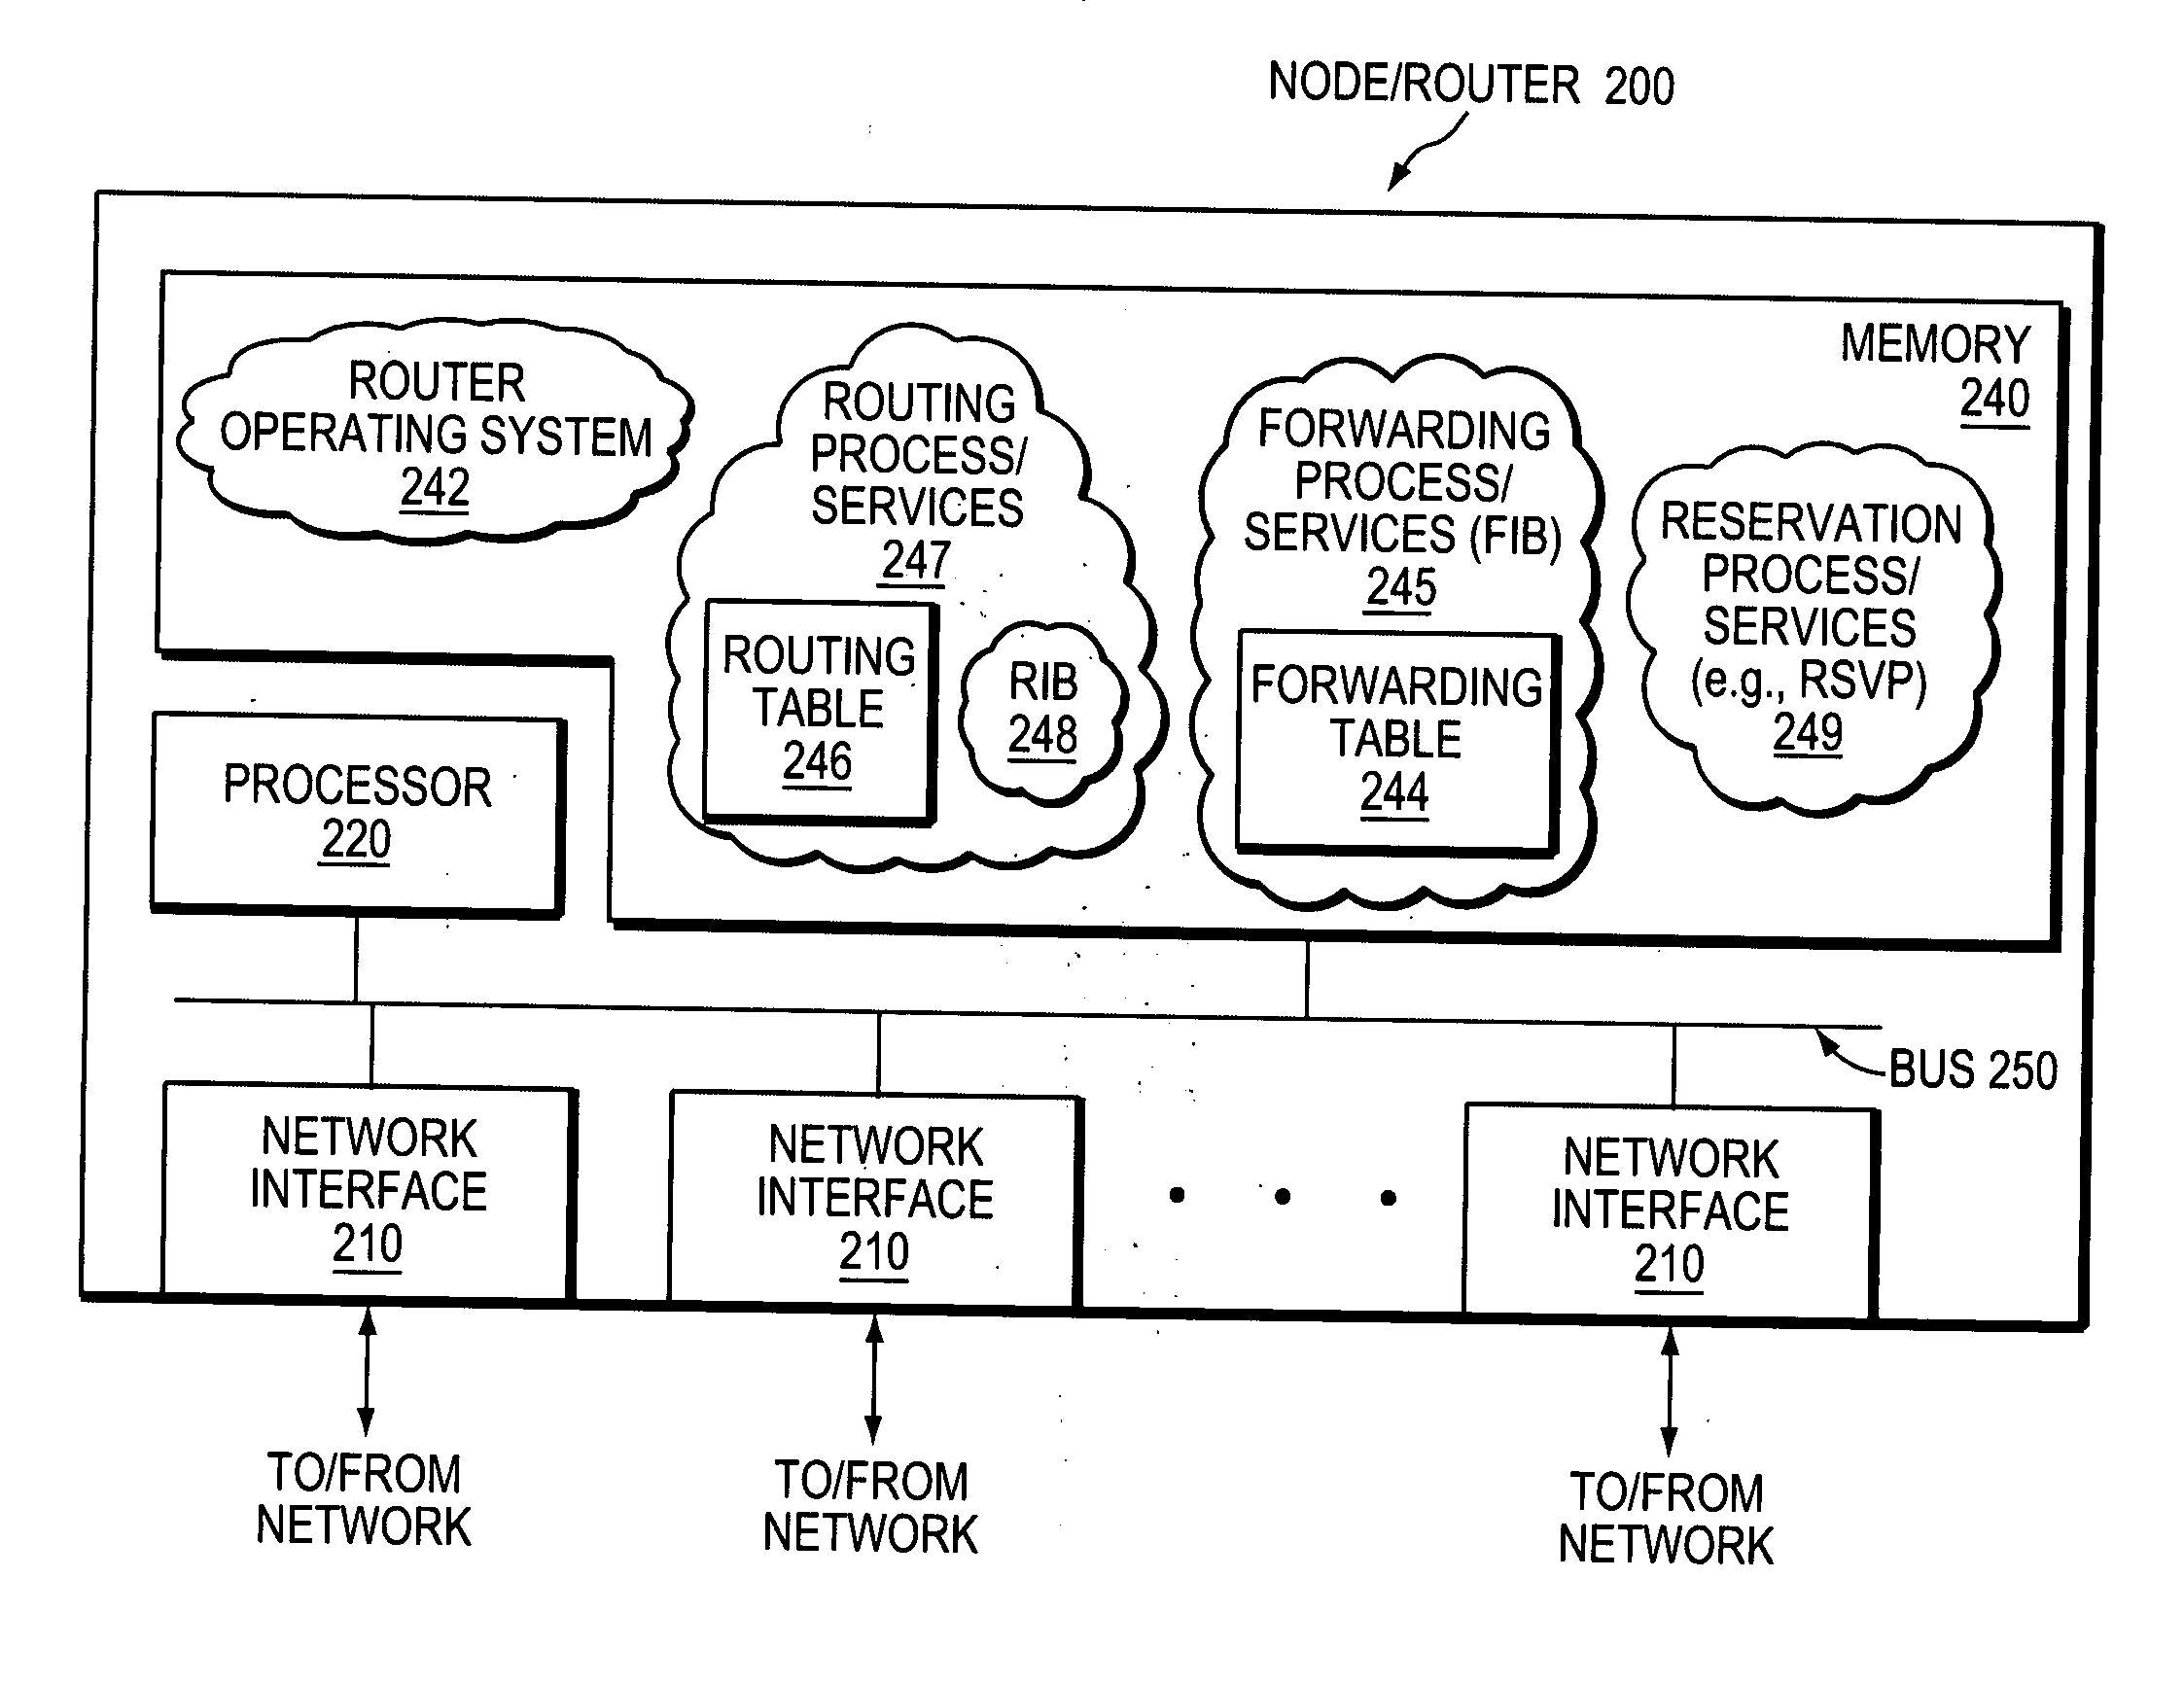 Efficiently decoupling reservation and data forwarding of data flows in a computer network